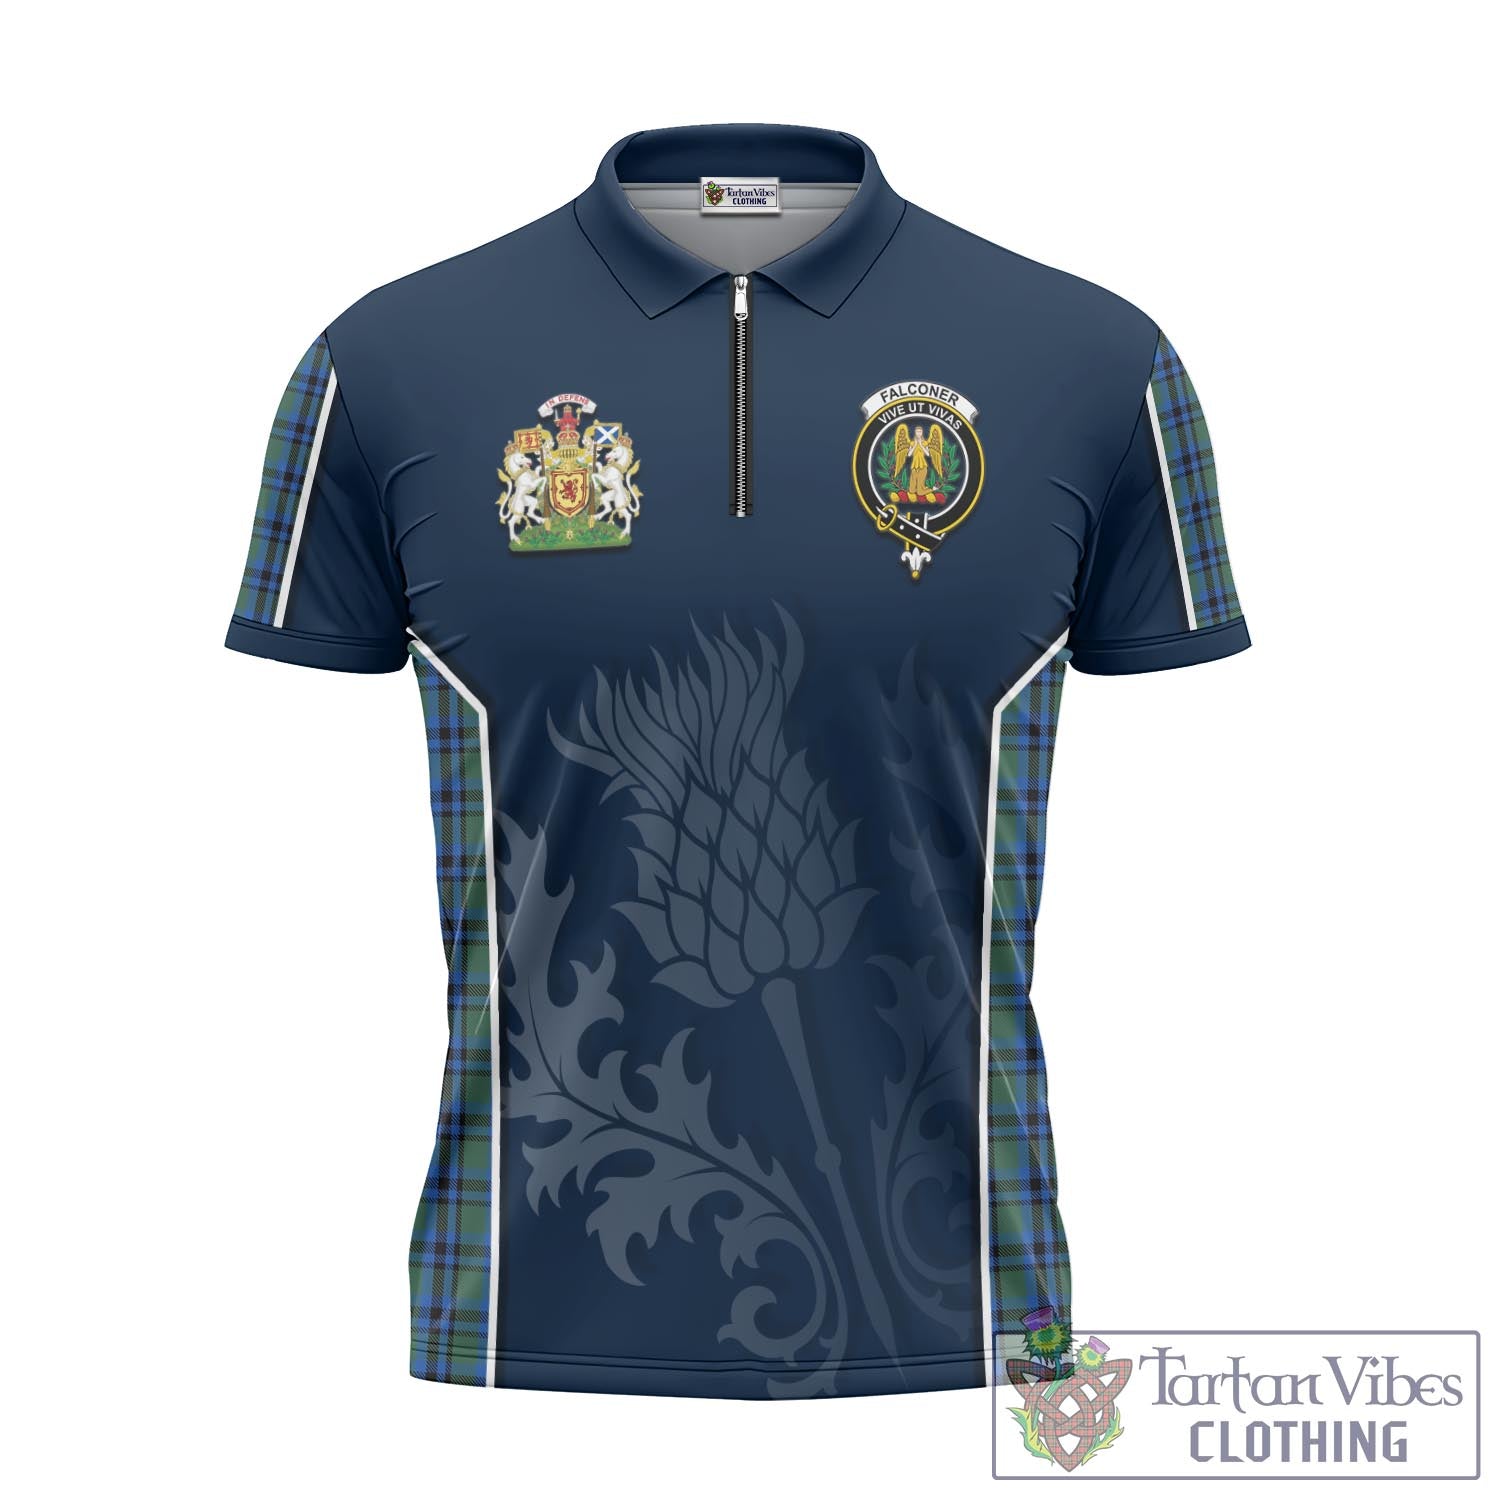 Tartan Vibes Clothing Falconer Tartan Zipper Polo Shirt with Family Crest and Scottish Thistle Vibes Sport Style